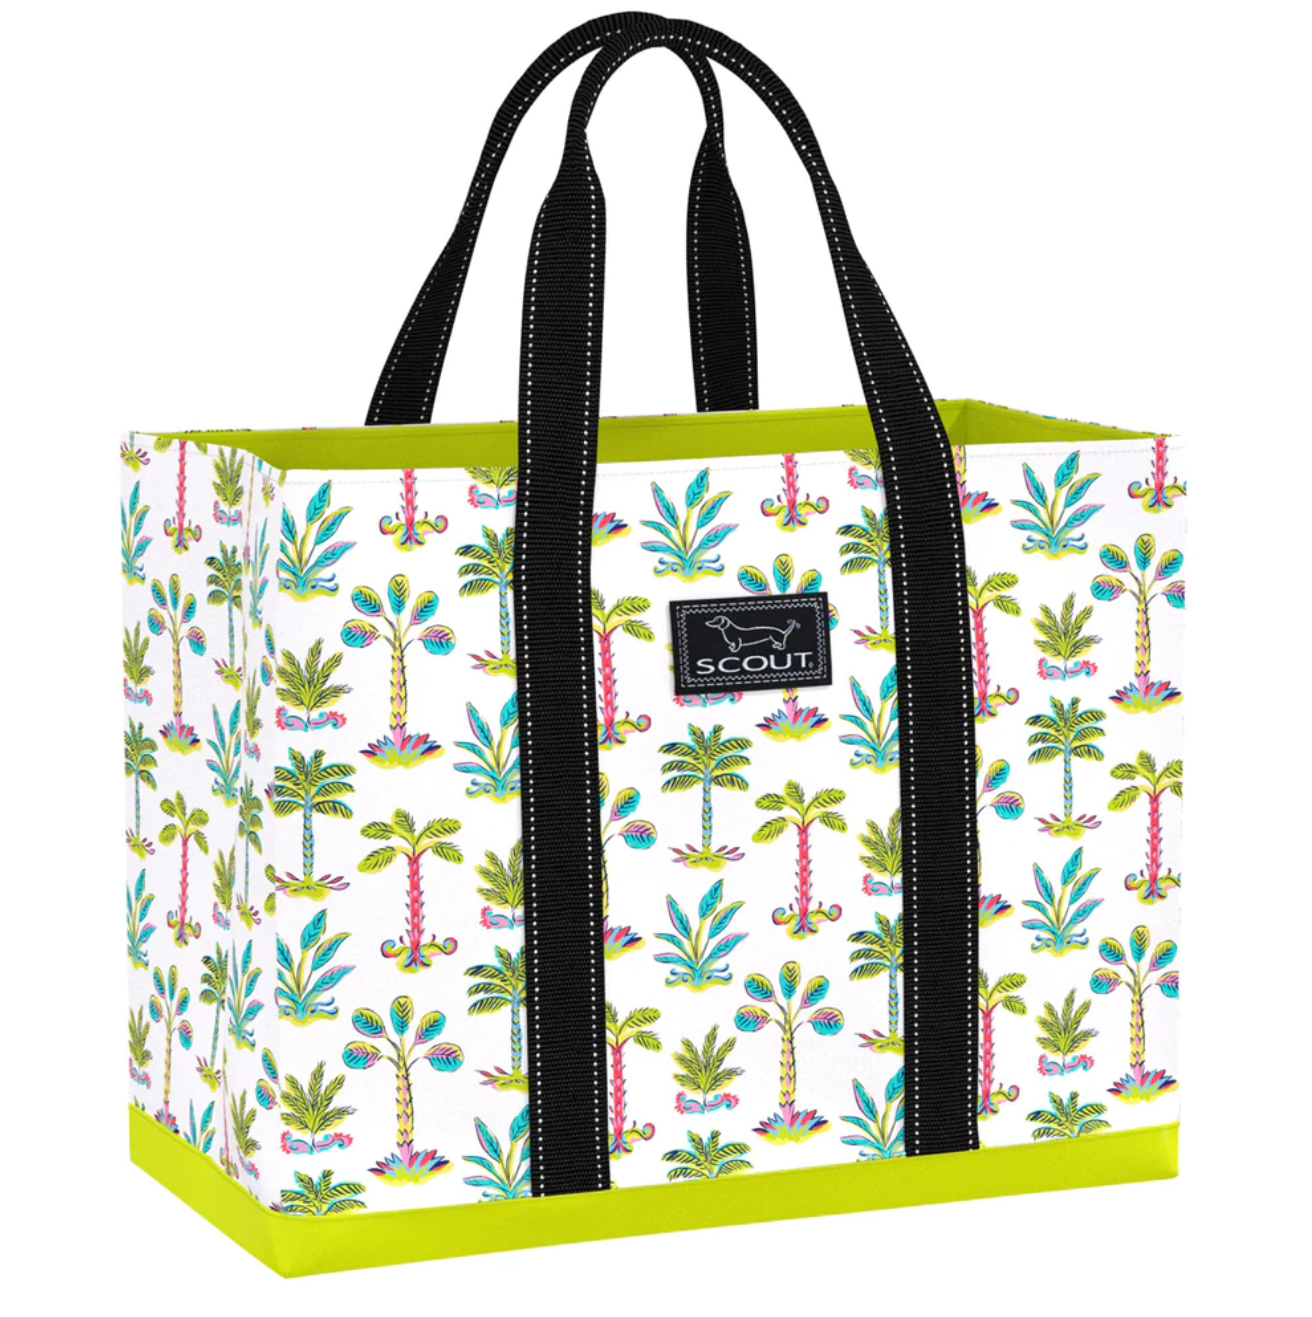 Scout Original Deano Tote Luggage, Totes in Hot Tropic at Wrapsody